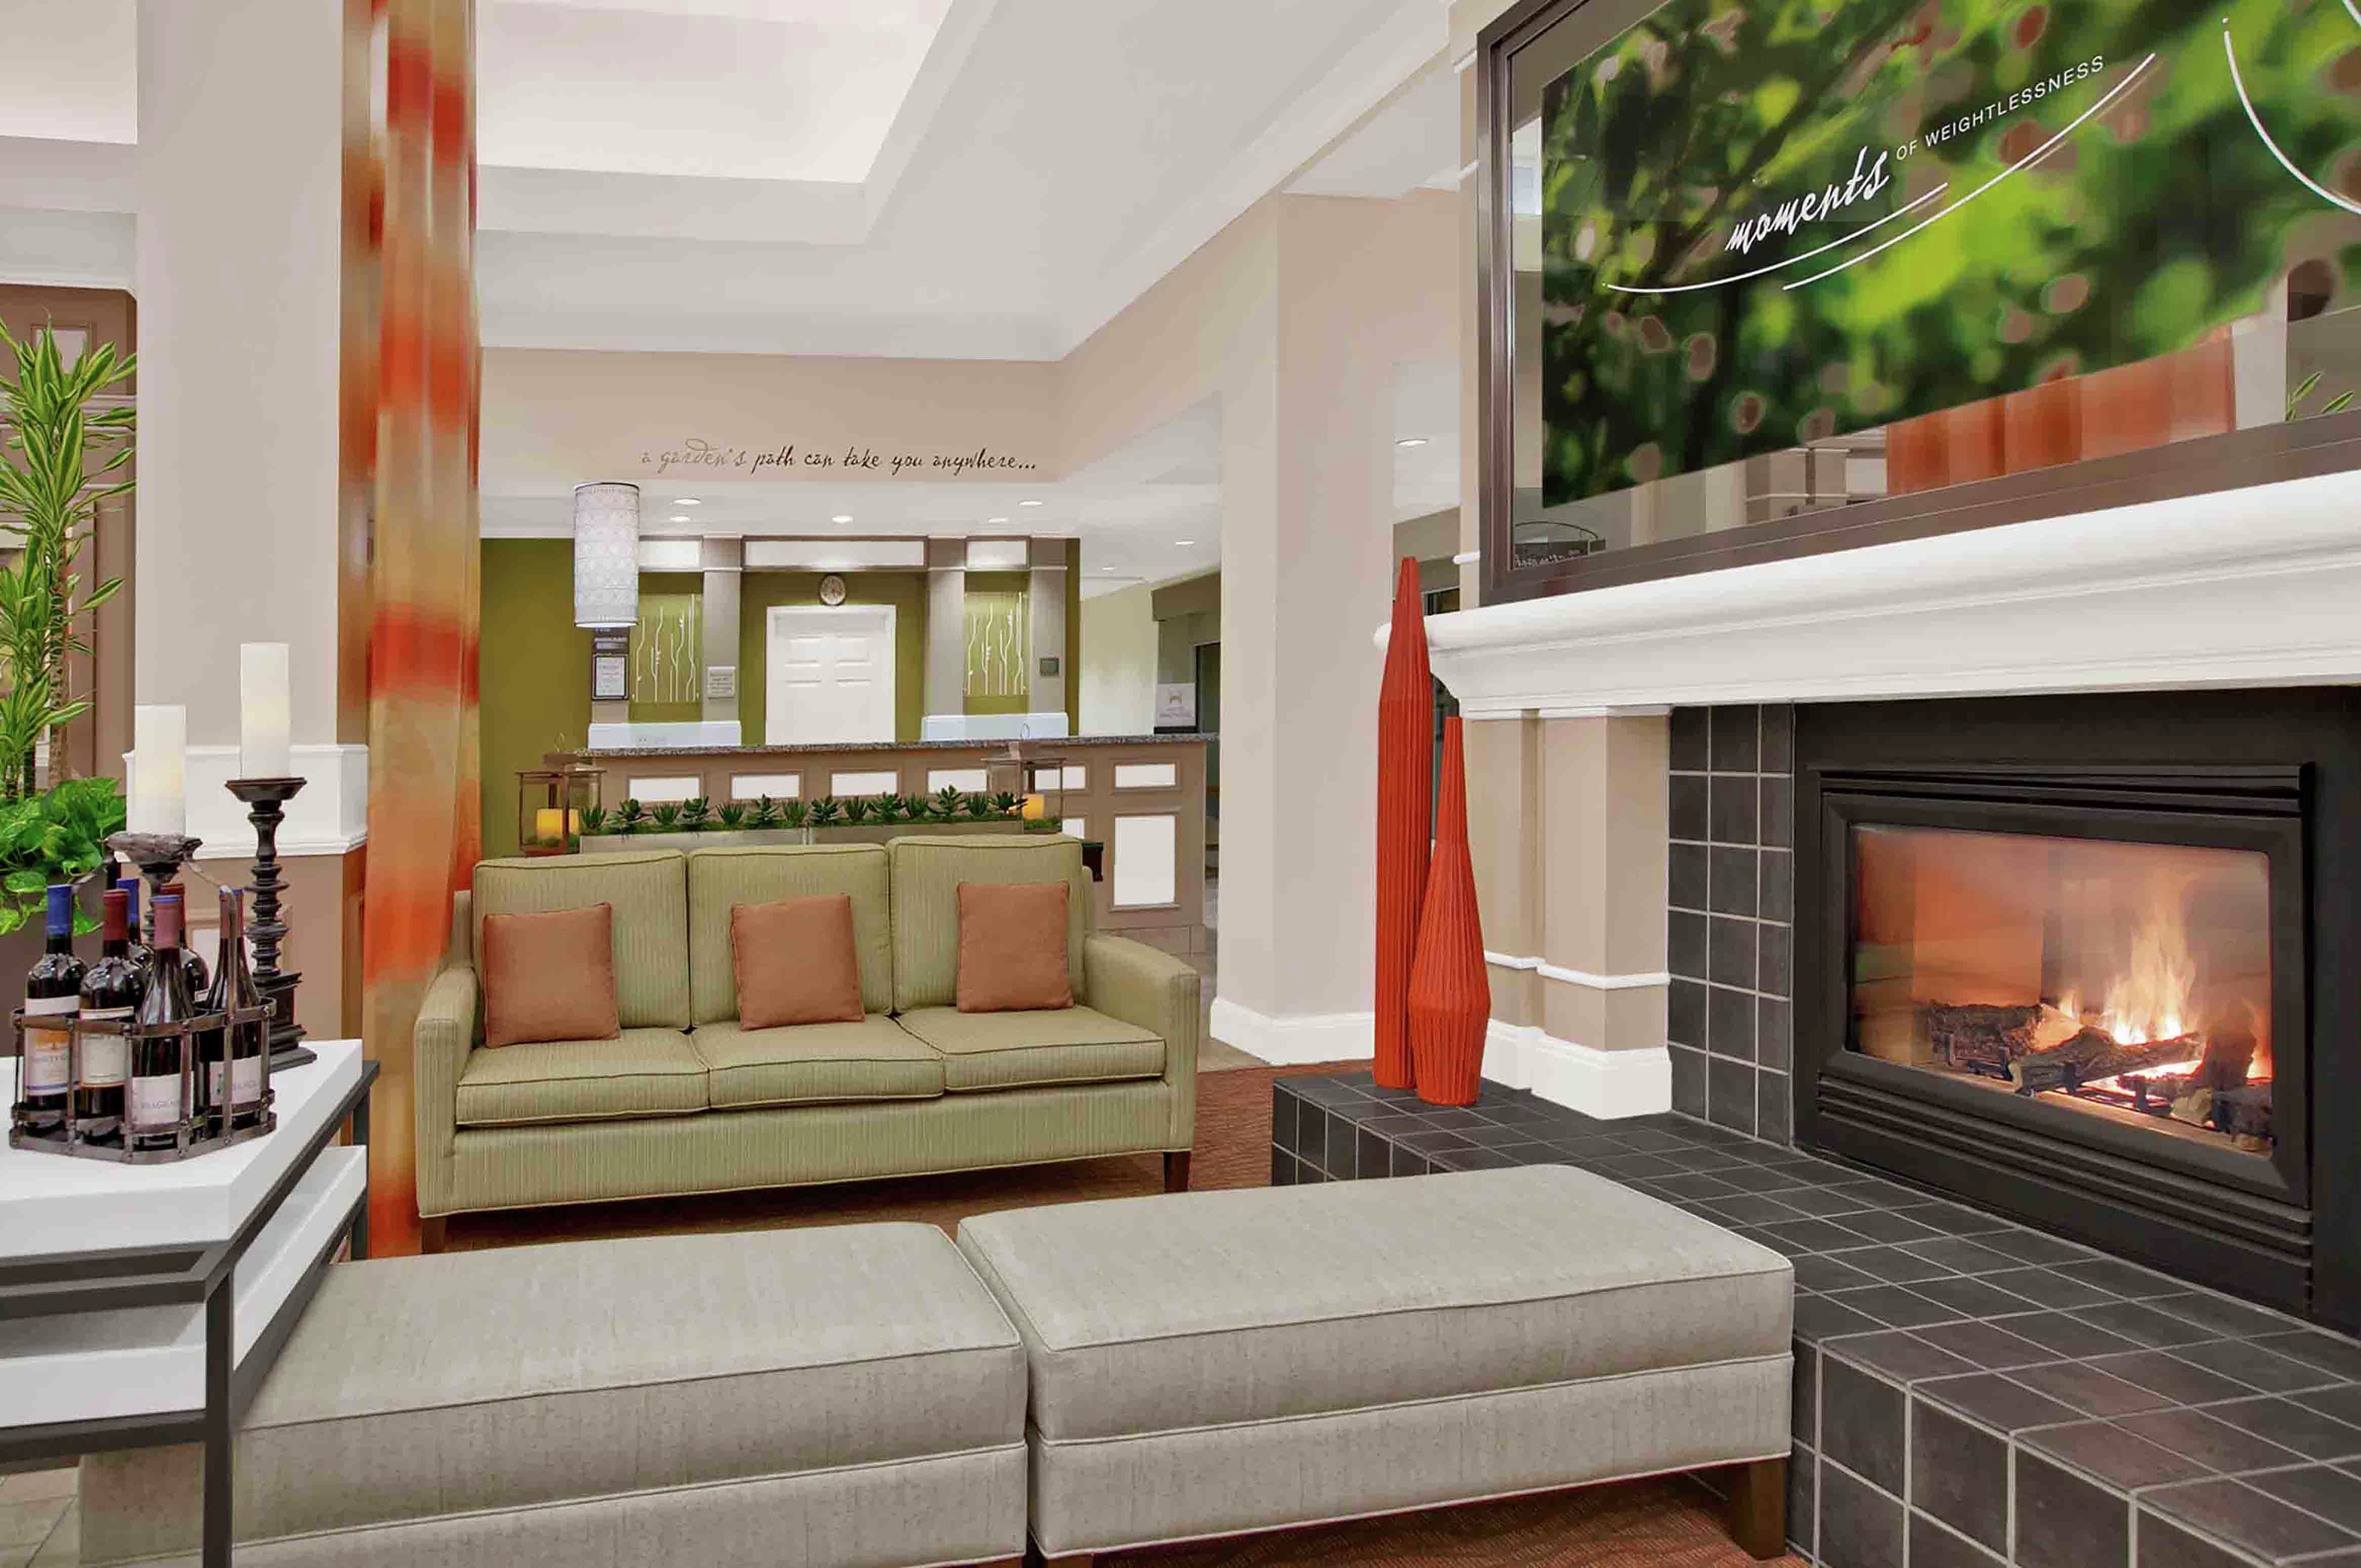 Lobby Seating Area with Sofa, Footrests and Fireplace